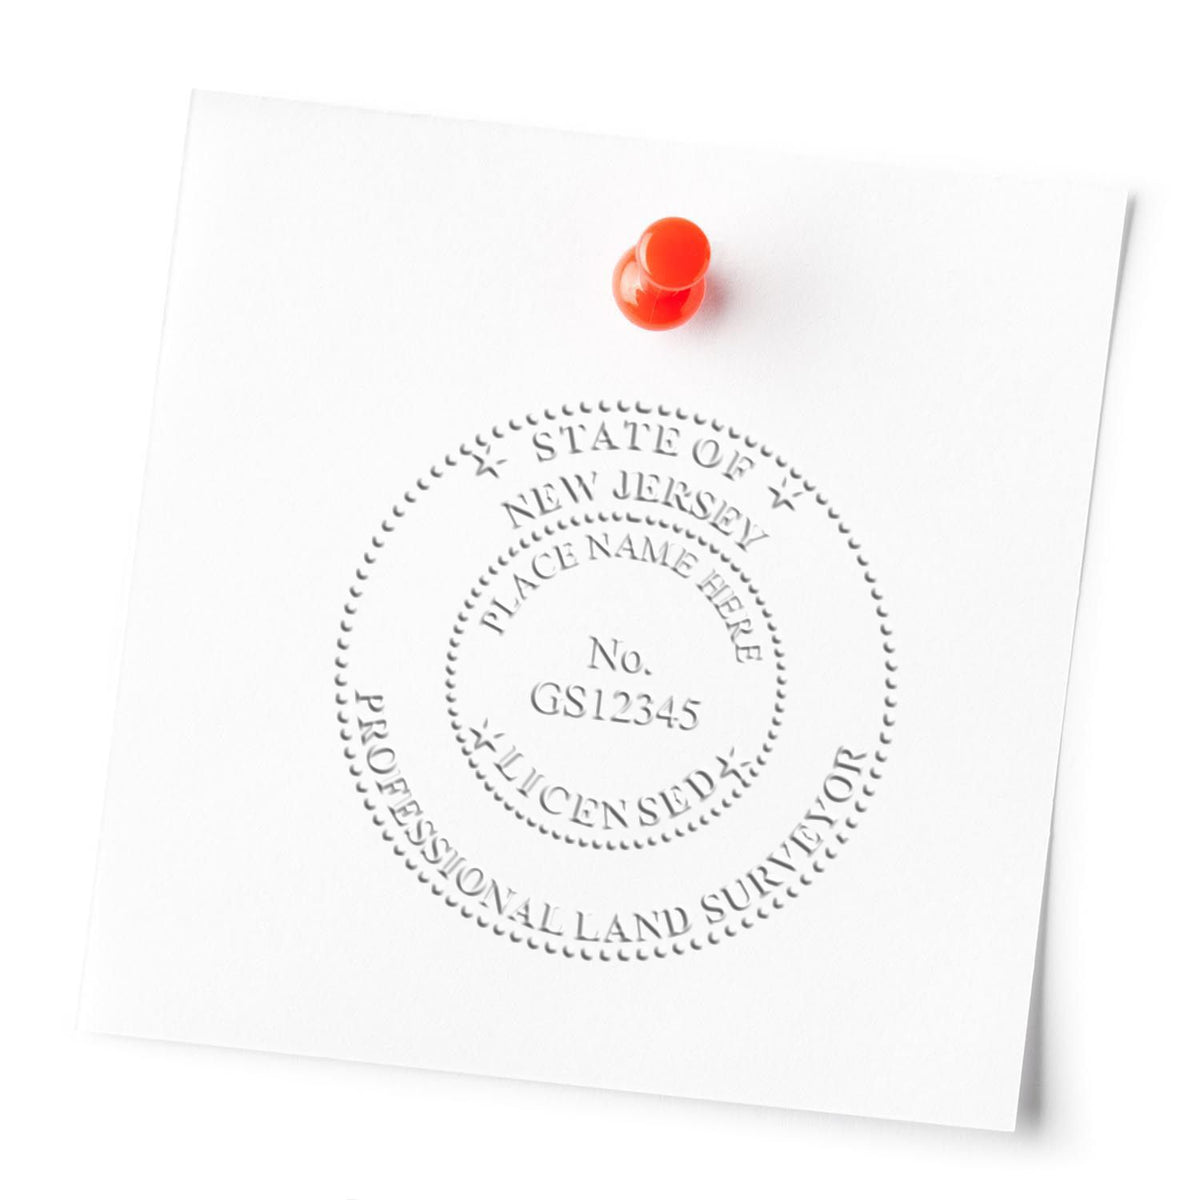 An alternative view of the Hybrid New Jersey Land Surveyor Seal stamped on a sheet of paper showing the image in use